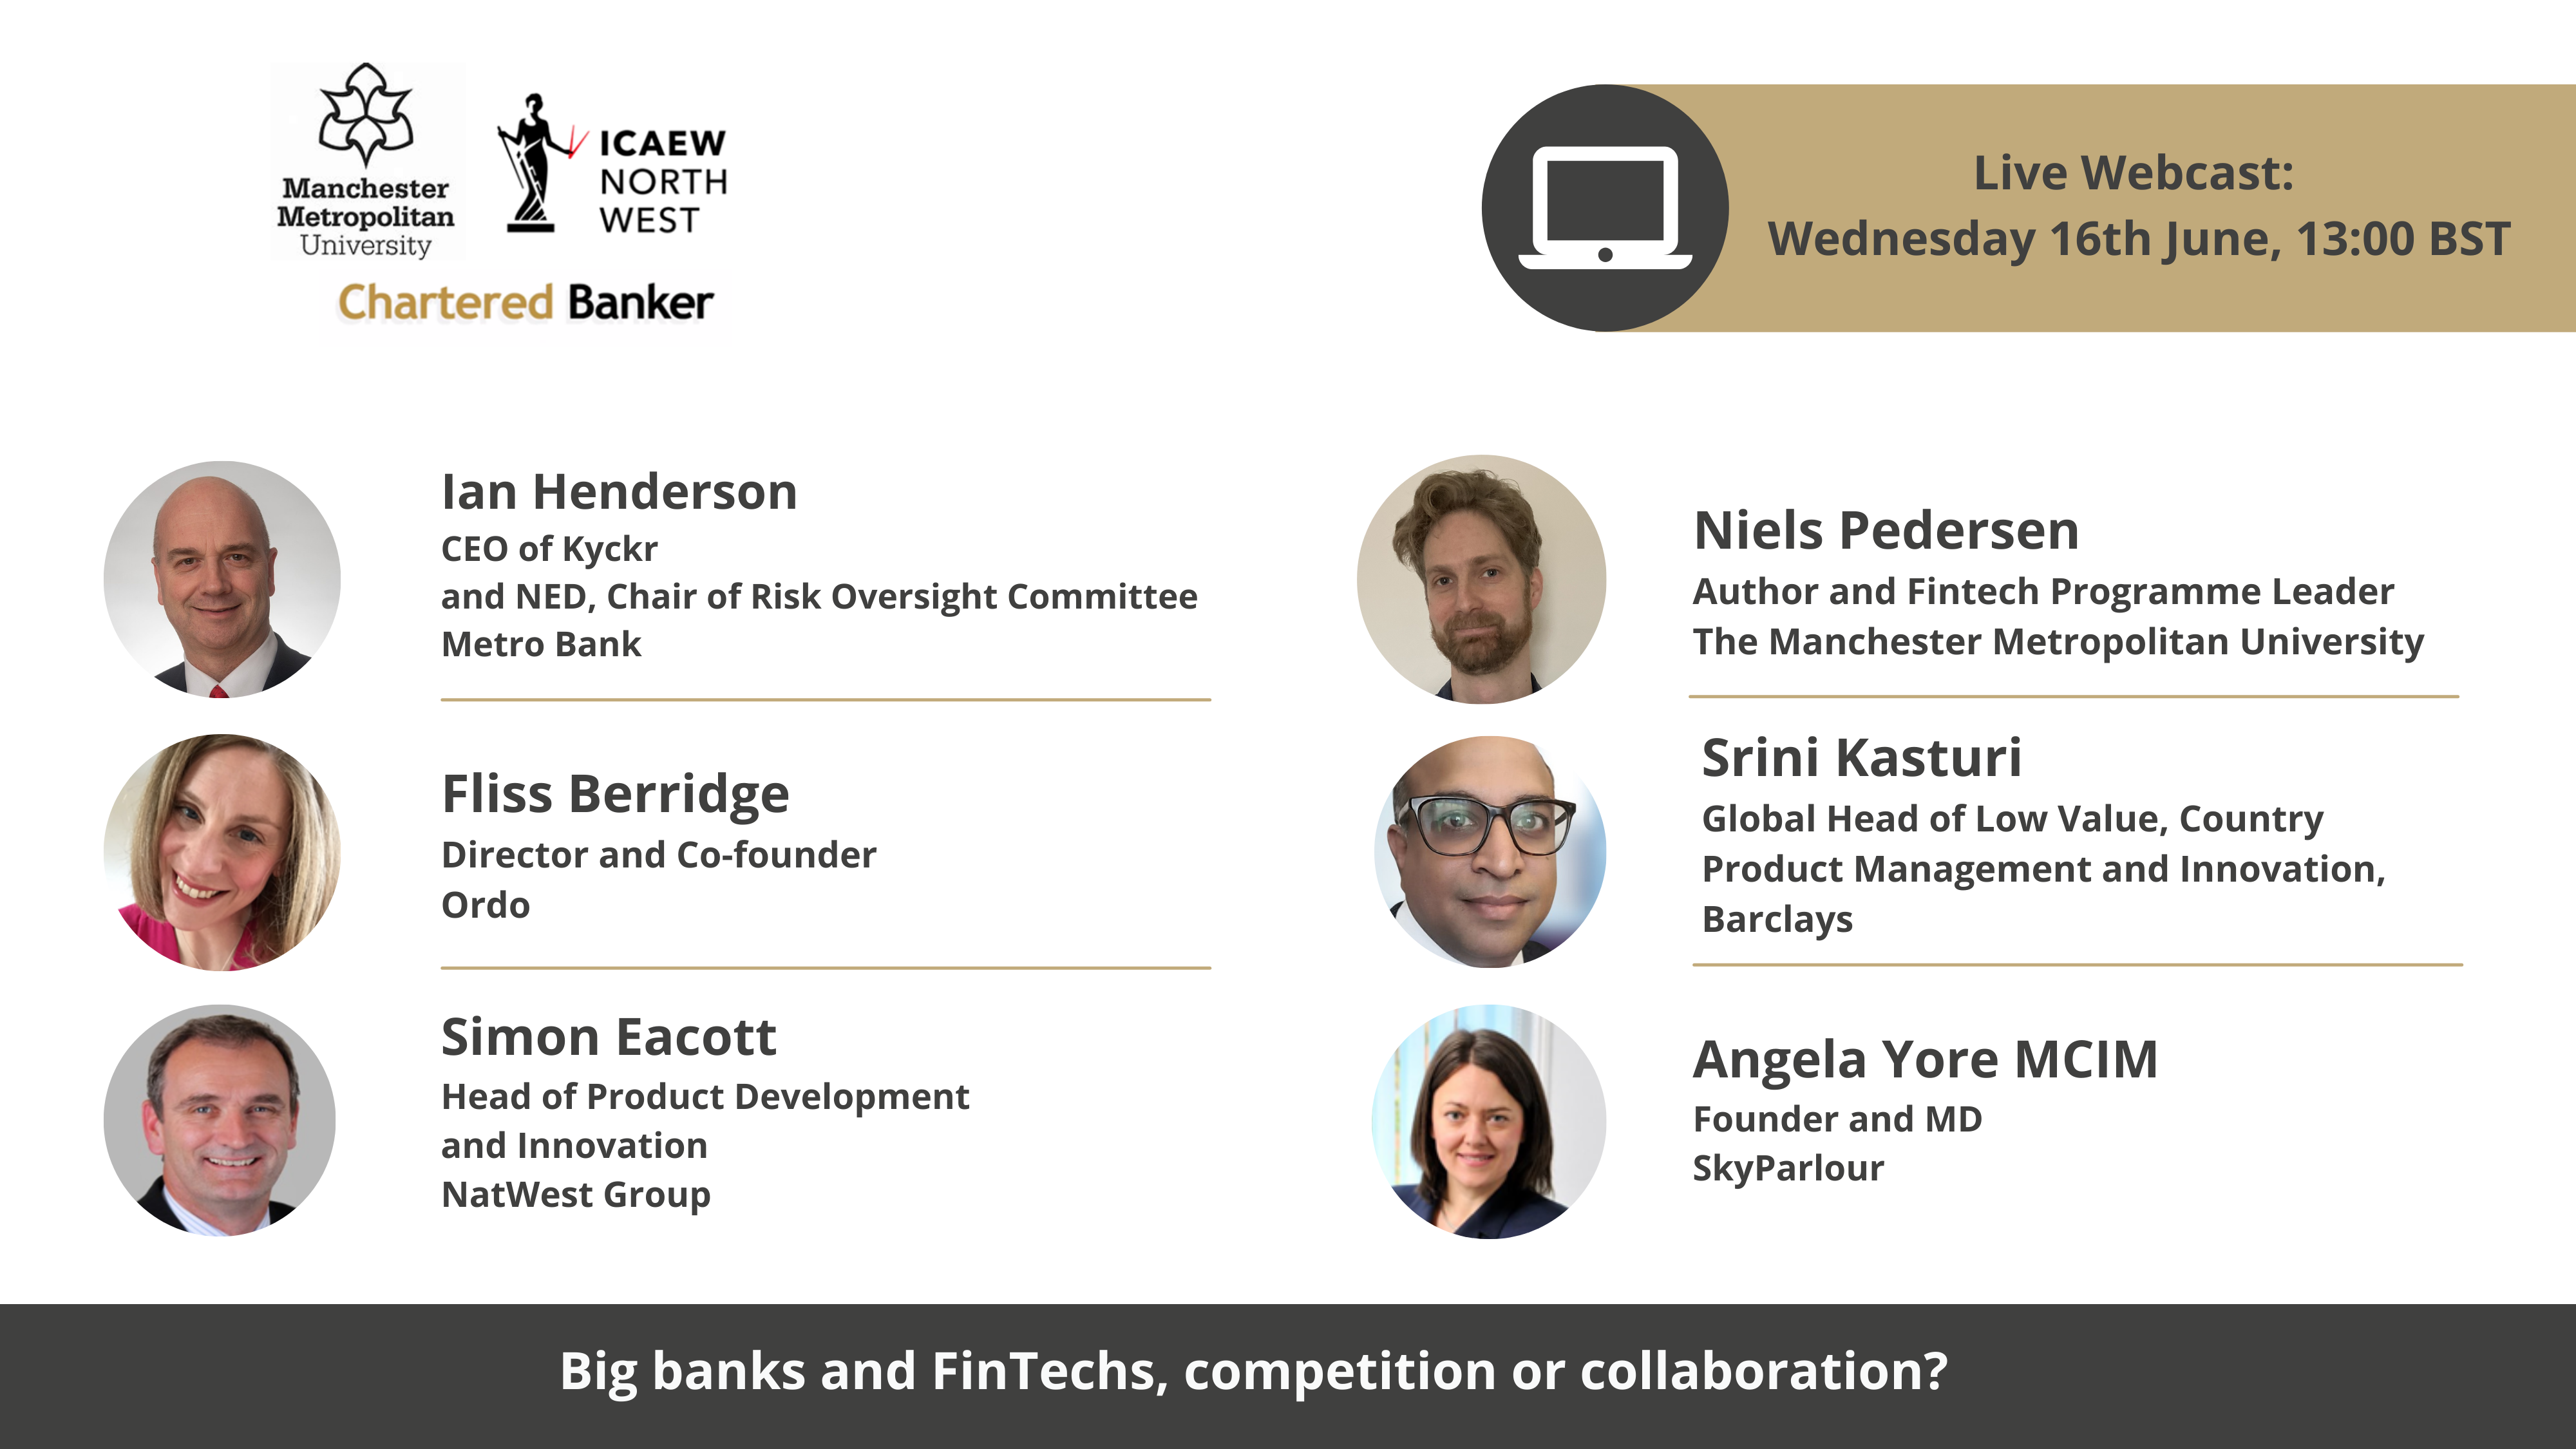 Big banks and FinTechs - competition or collaboration?